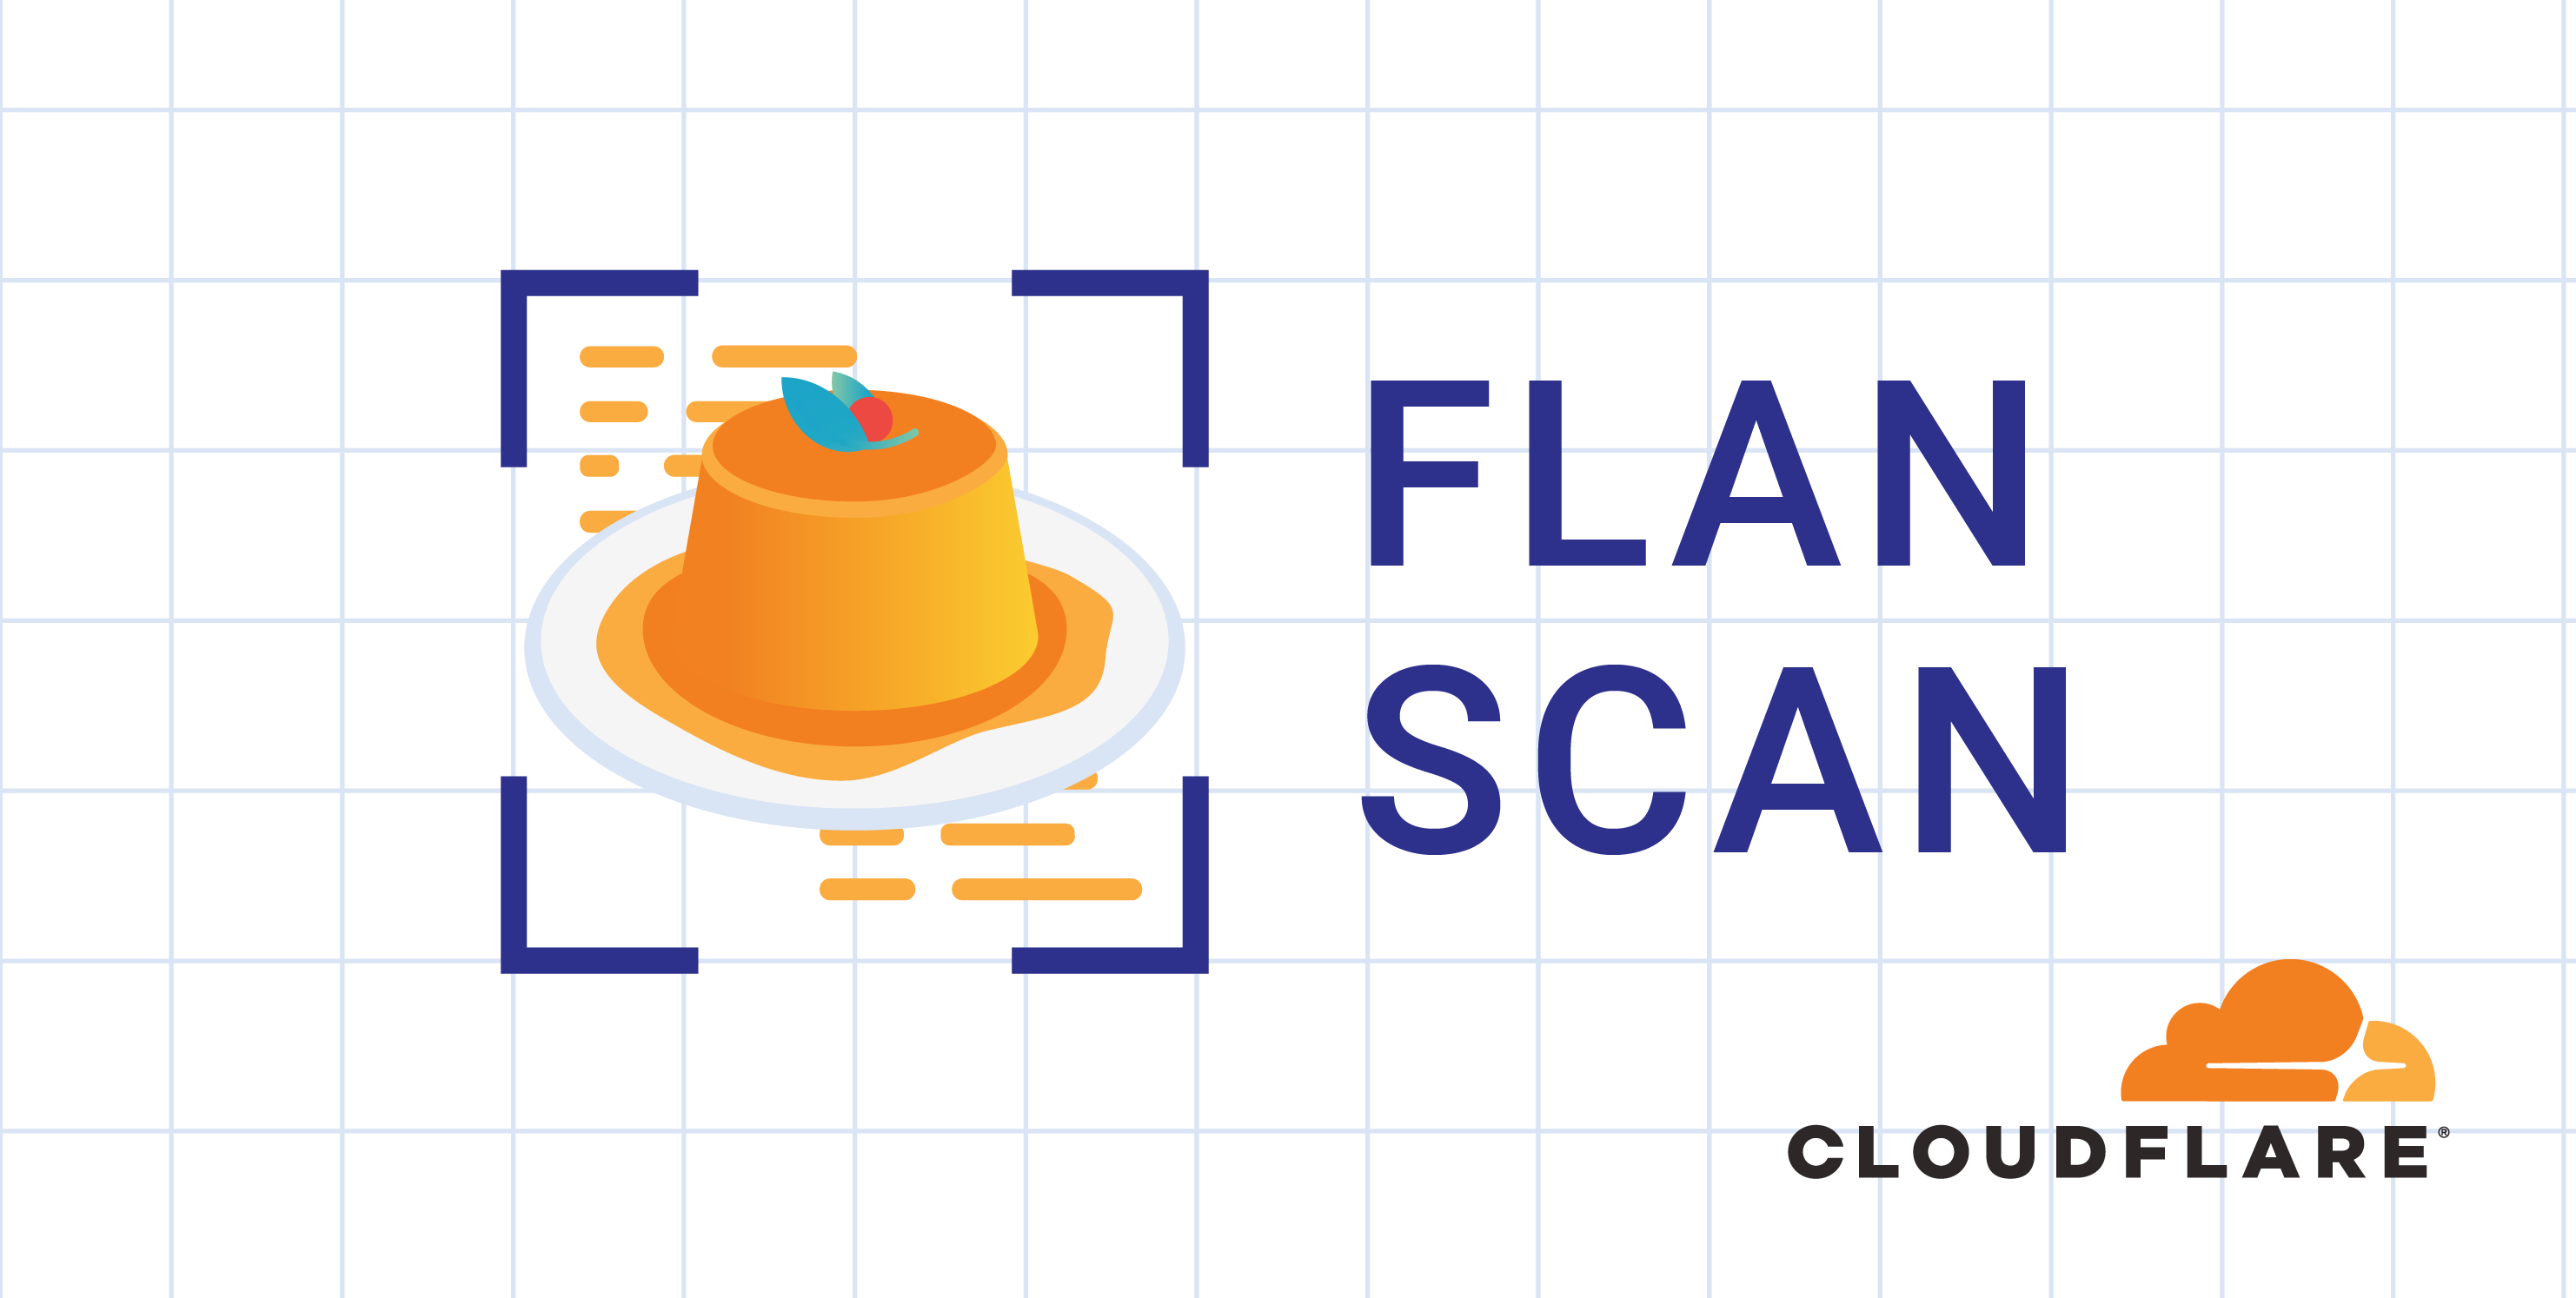 Introducing Flan Scan: Cloudflare’s Lightweight Network Vulnerability Scanner